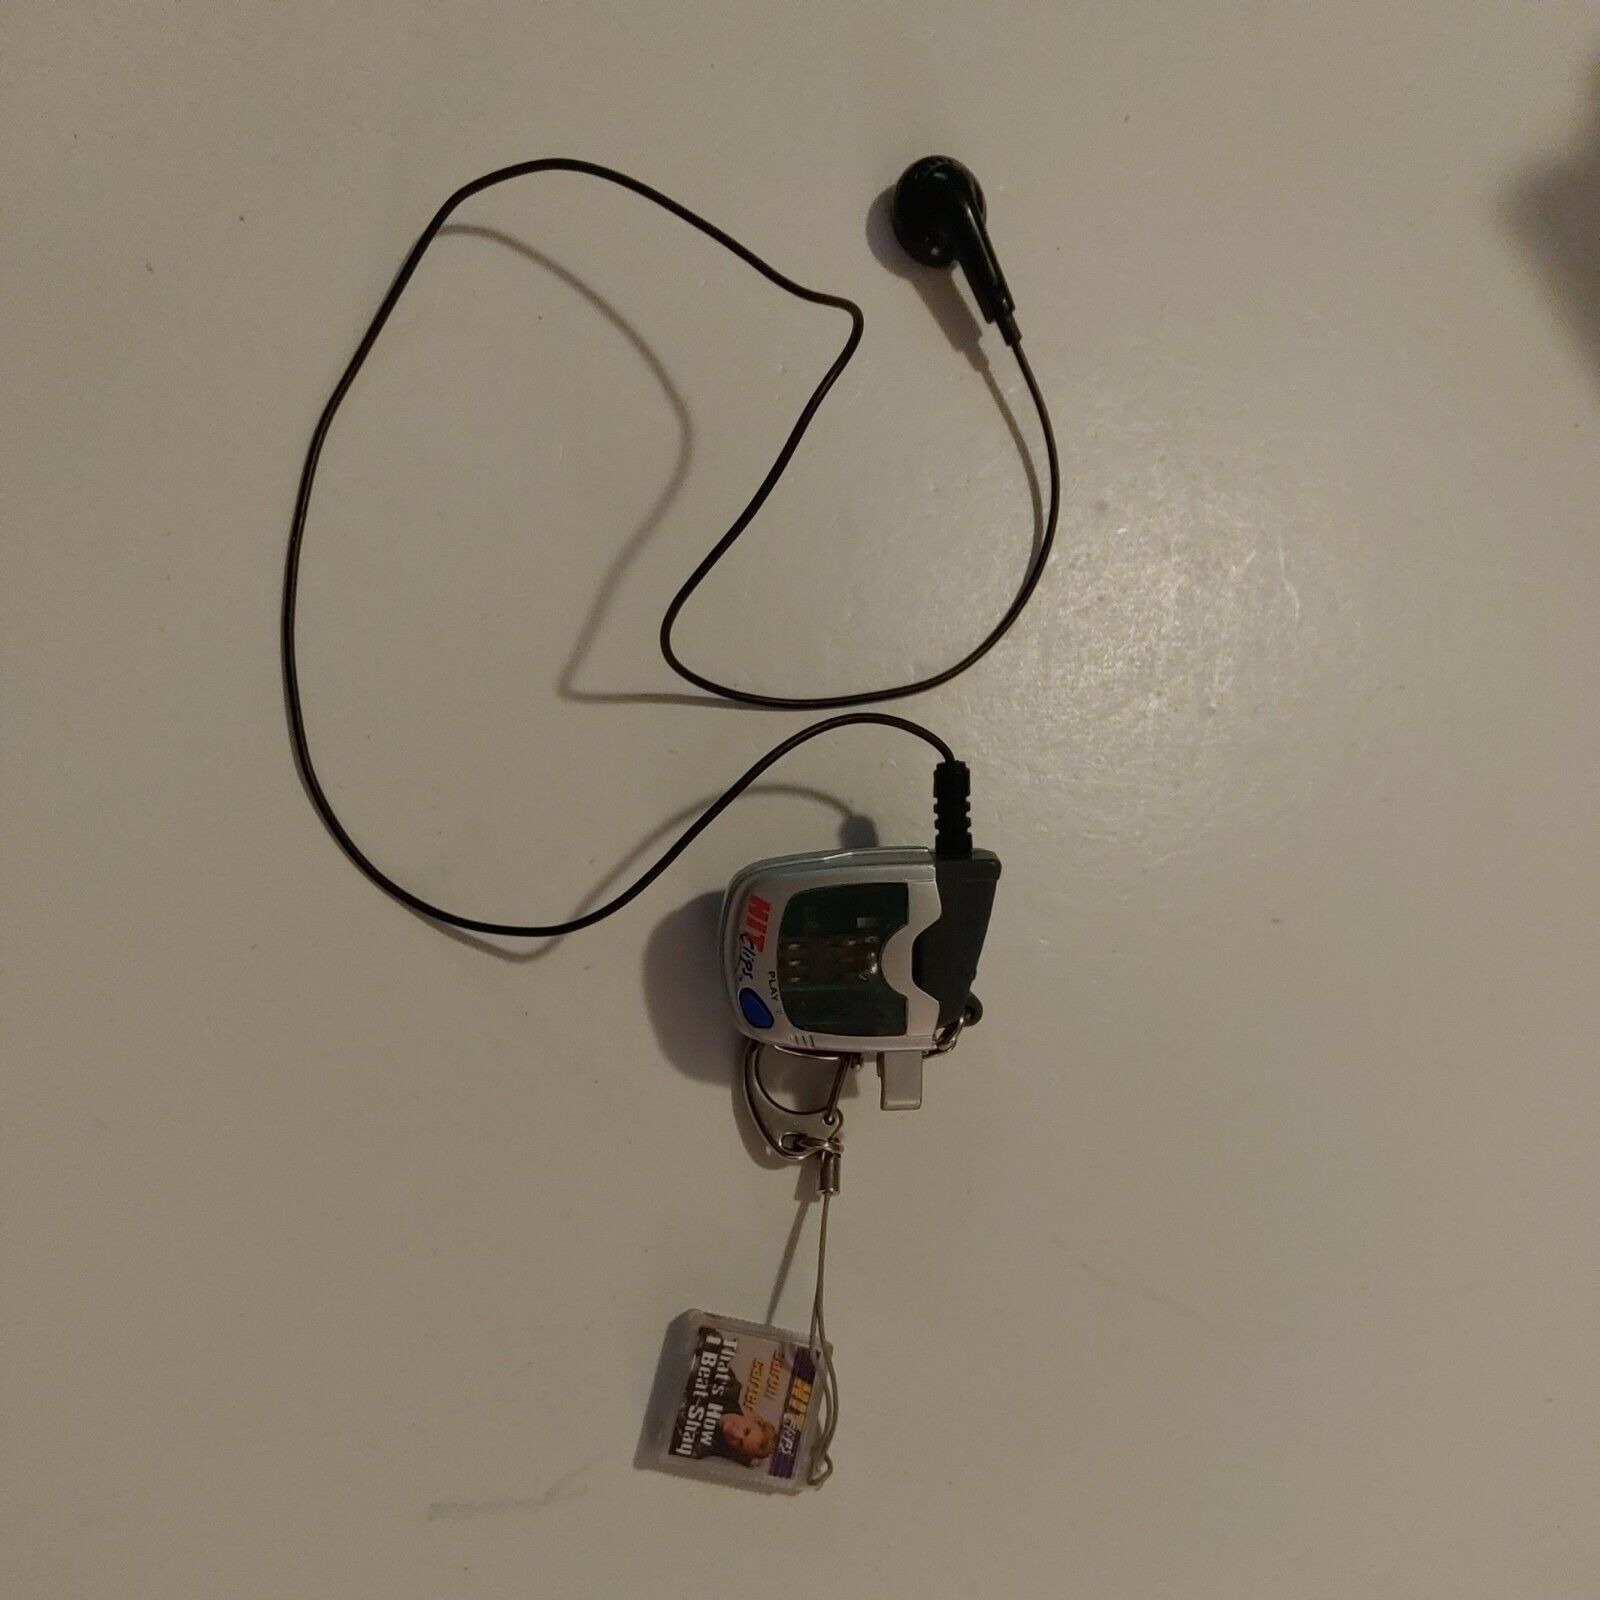 Hit Clips Player Aaron Carter How I Beat Shaq (BROKEN BACK CLIP) Tested Works